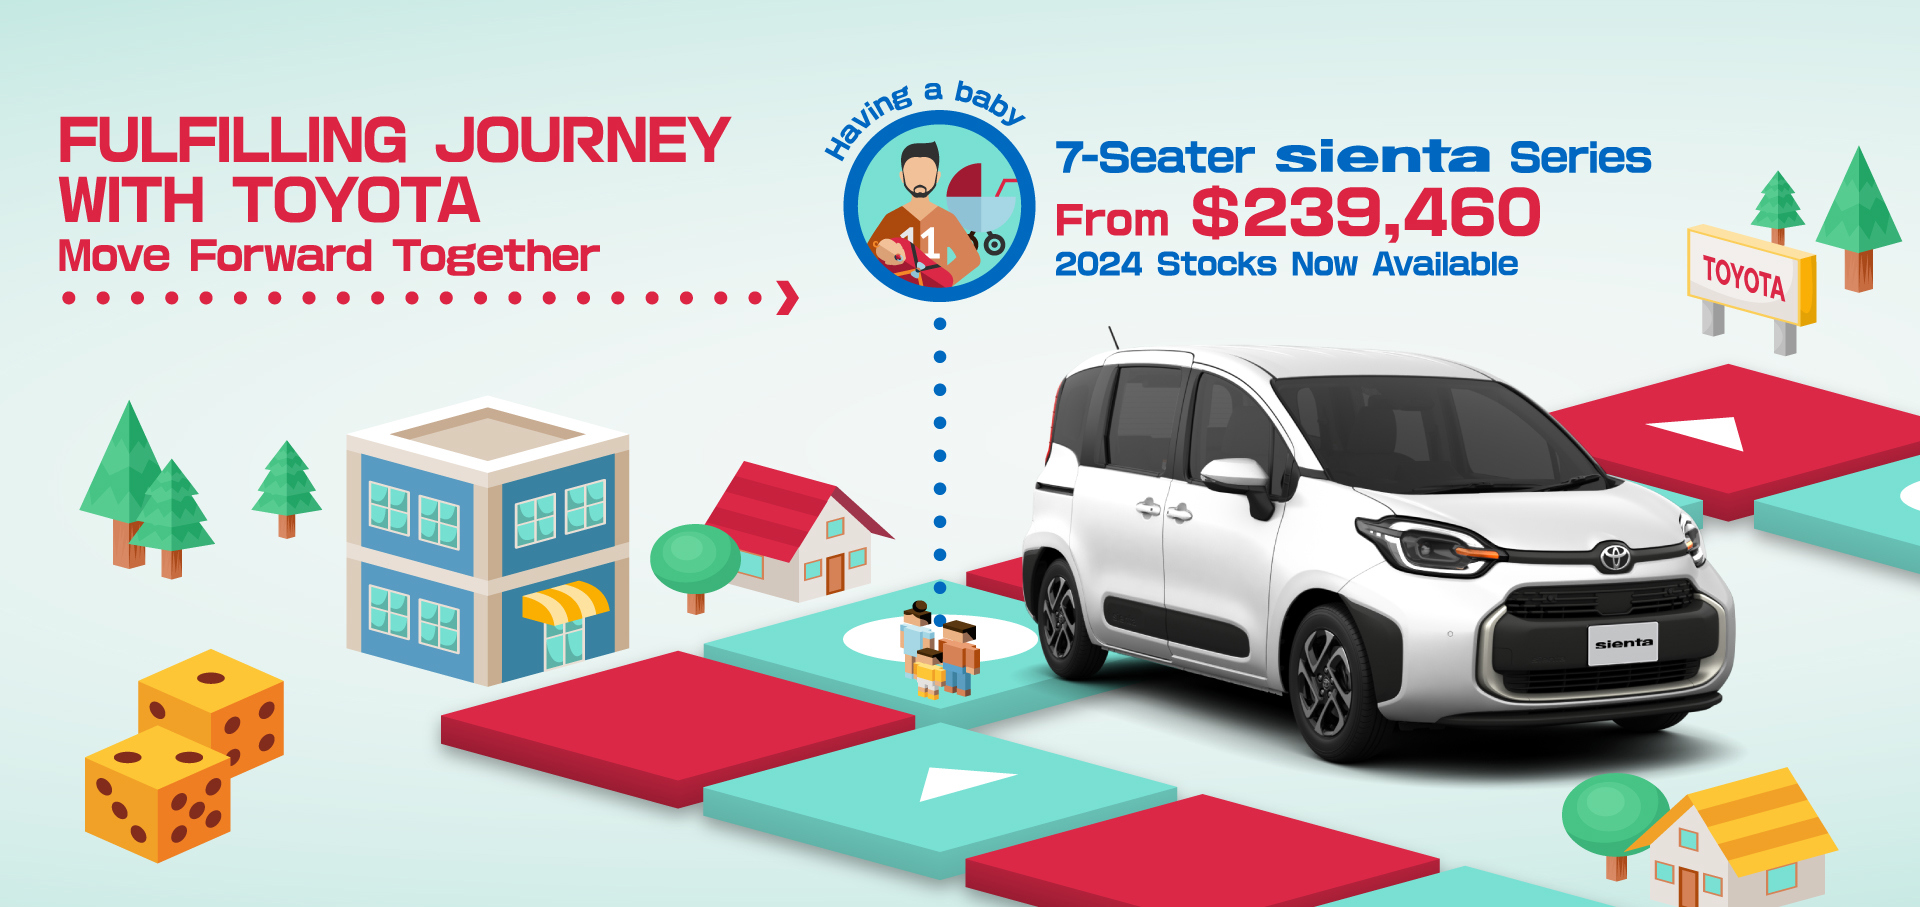 7-Seater SIENTA Series start from $239,460｜2024 Stocks Available